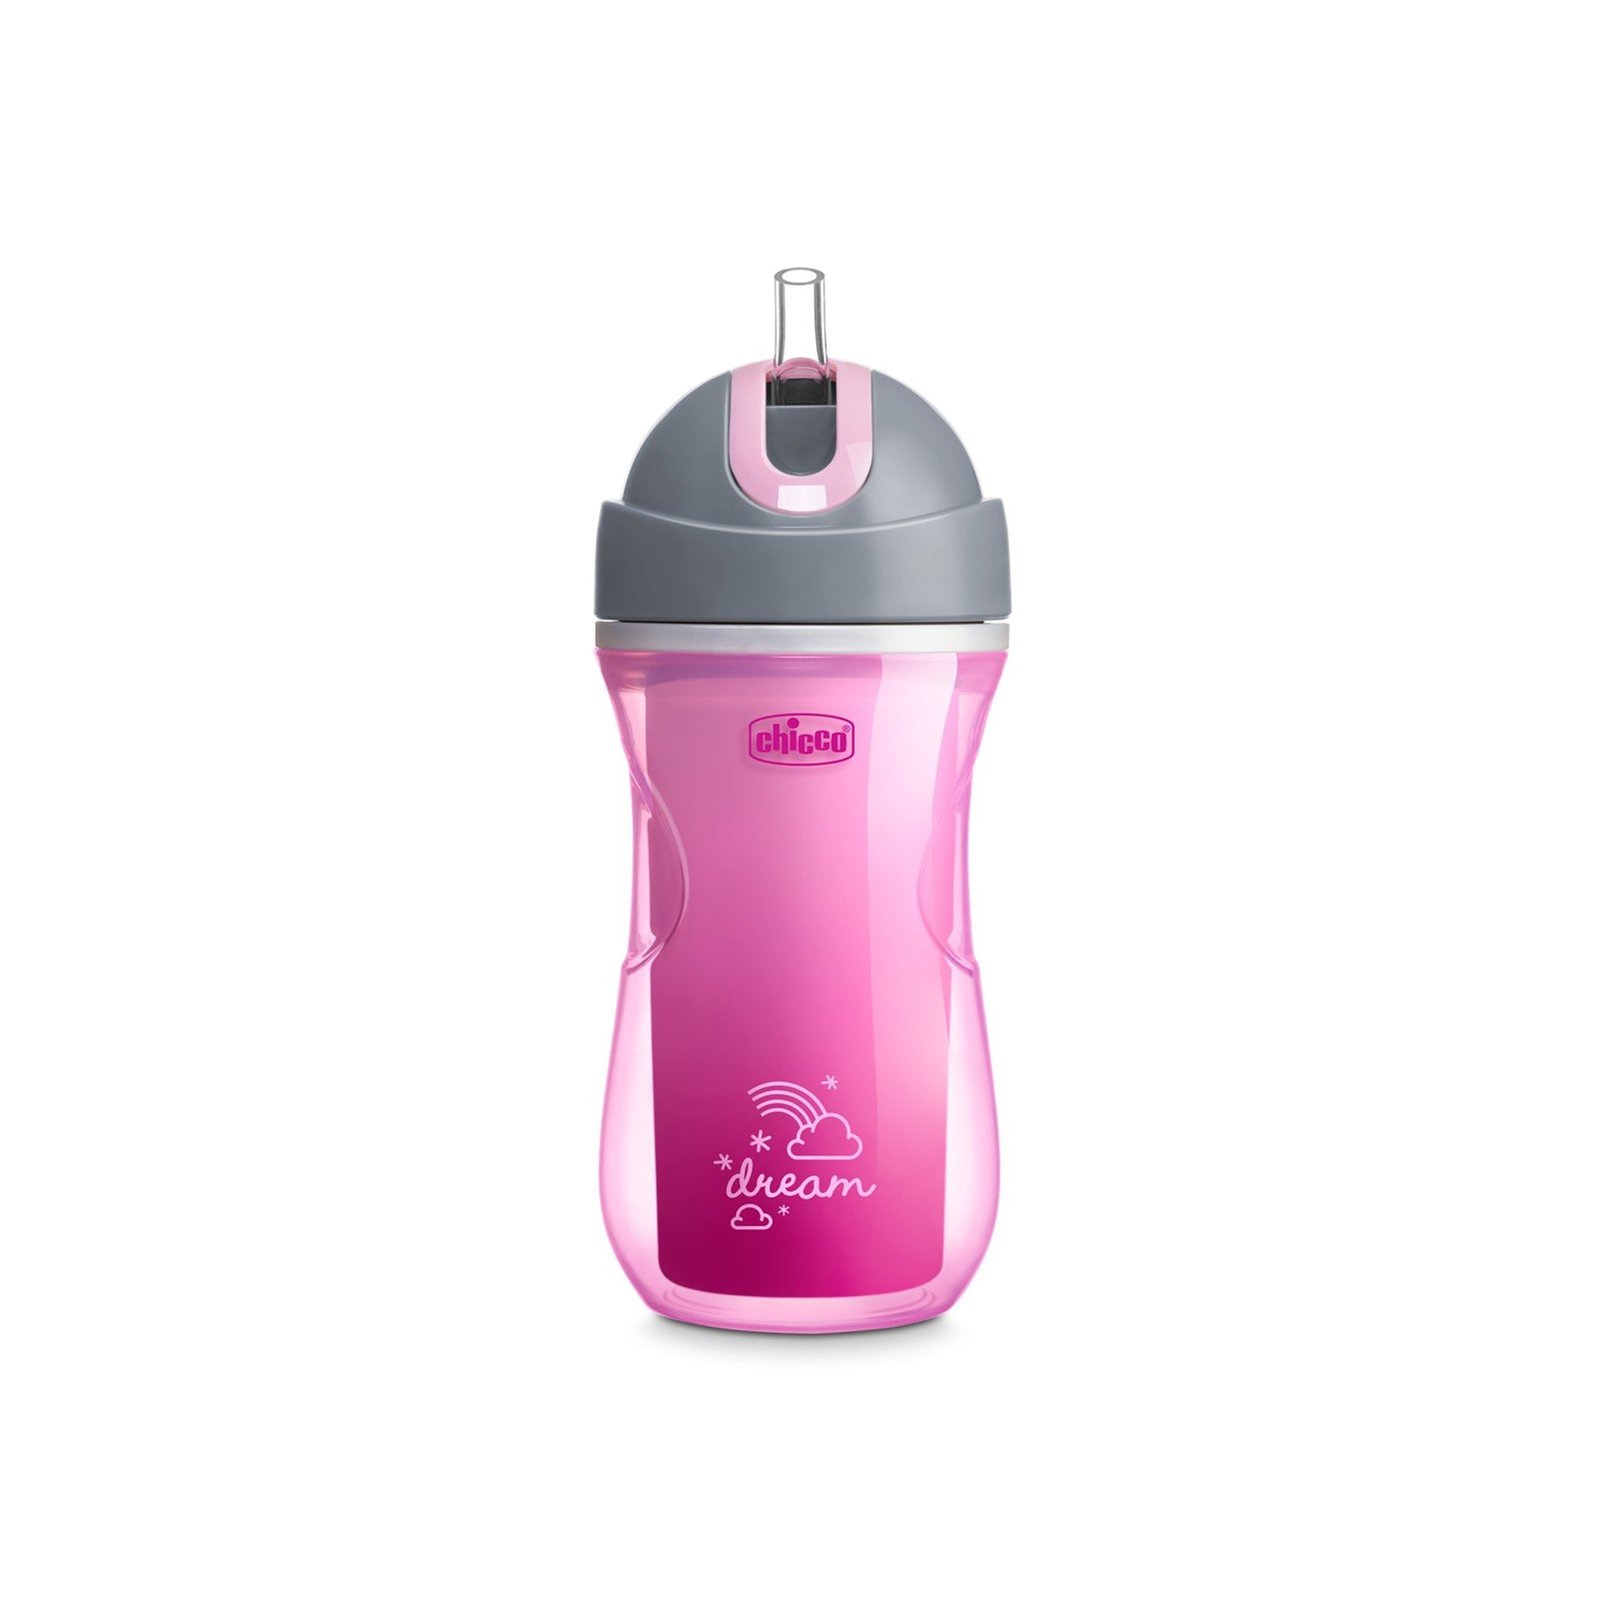 Chicco Mix & Match Sport Cup Insulated Bottle 14m+ Pink 266ml (9 fl oz)